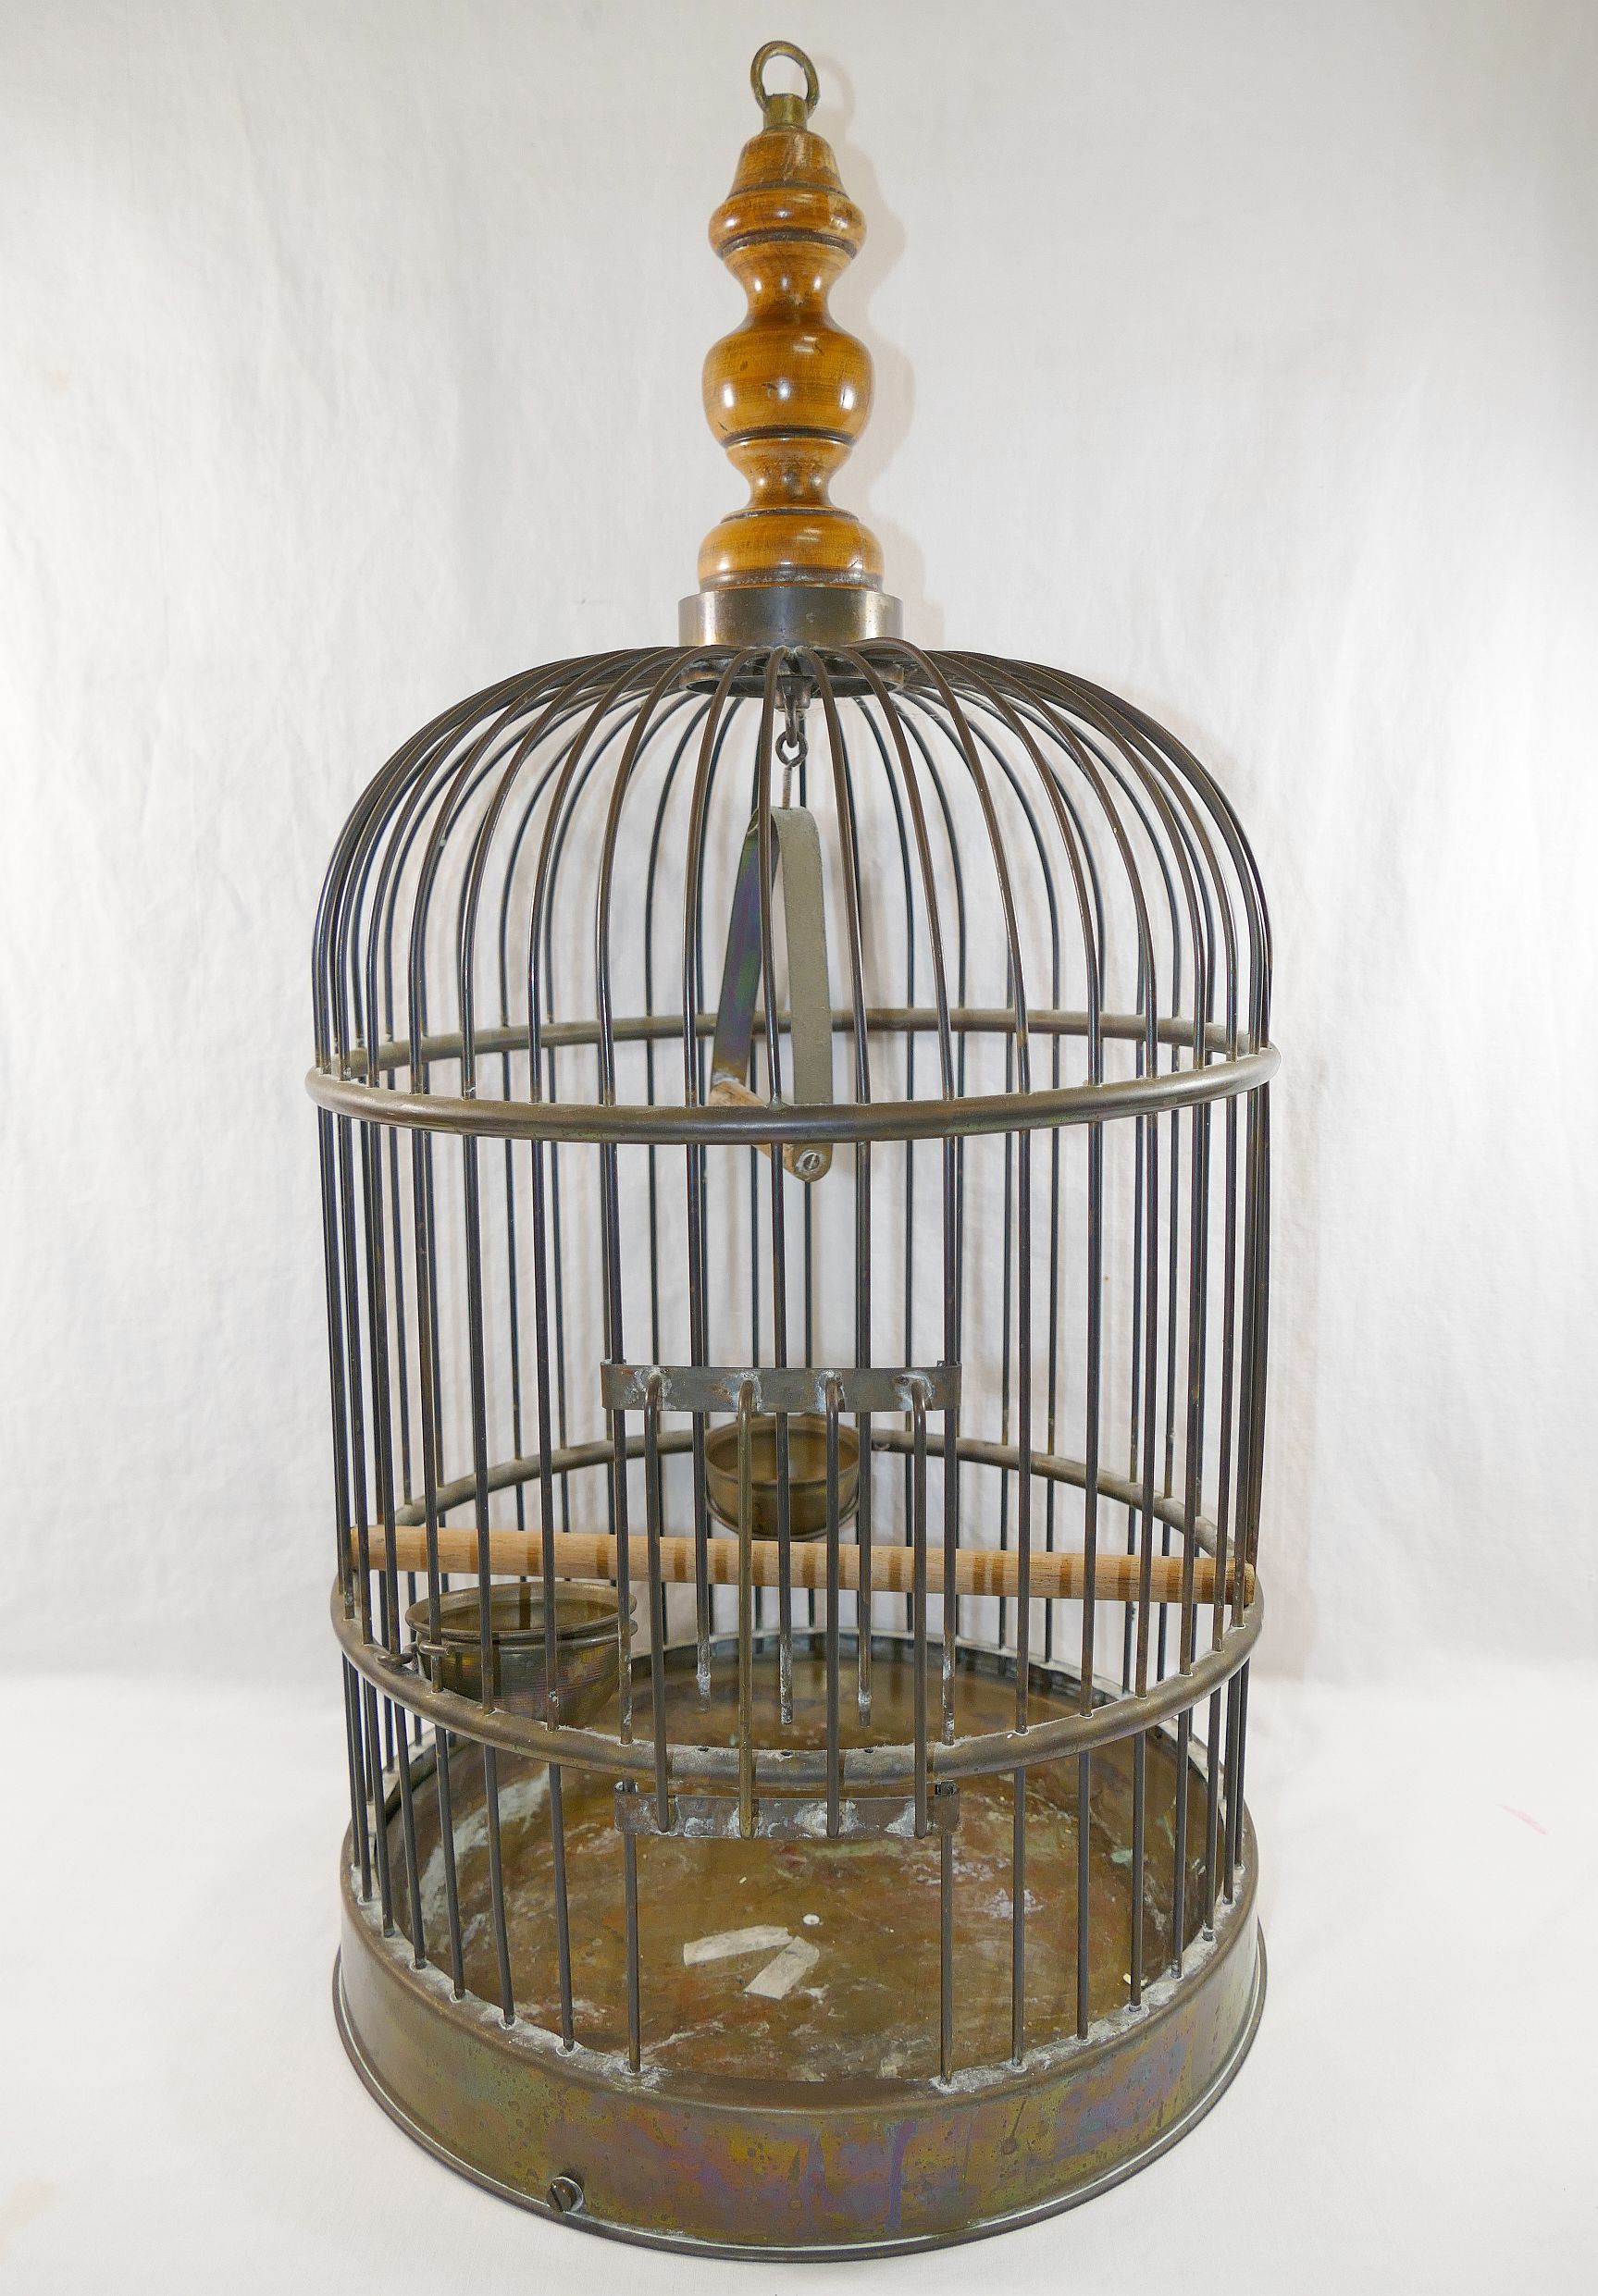 A brass bird cage, with turned wooden surmount, with wooden perch, swing, two feeding bowls and